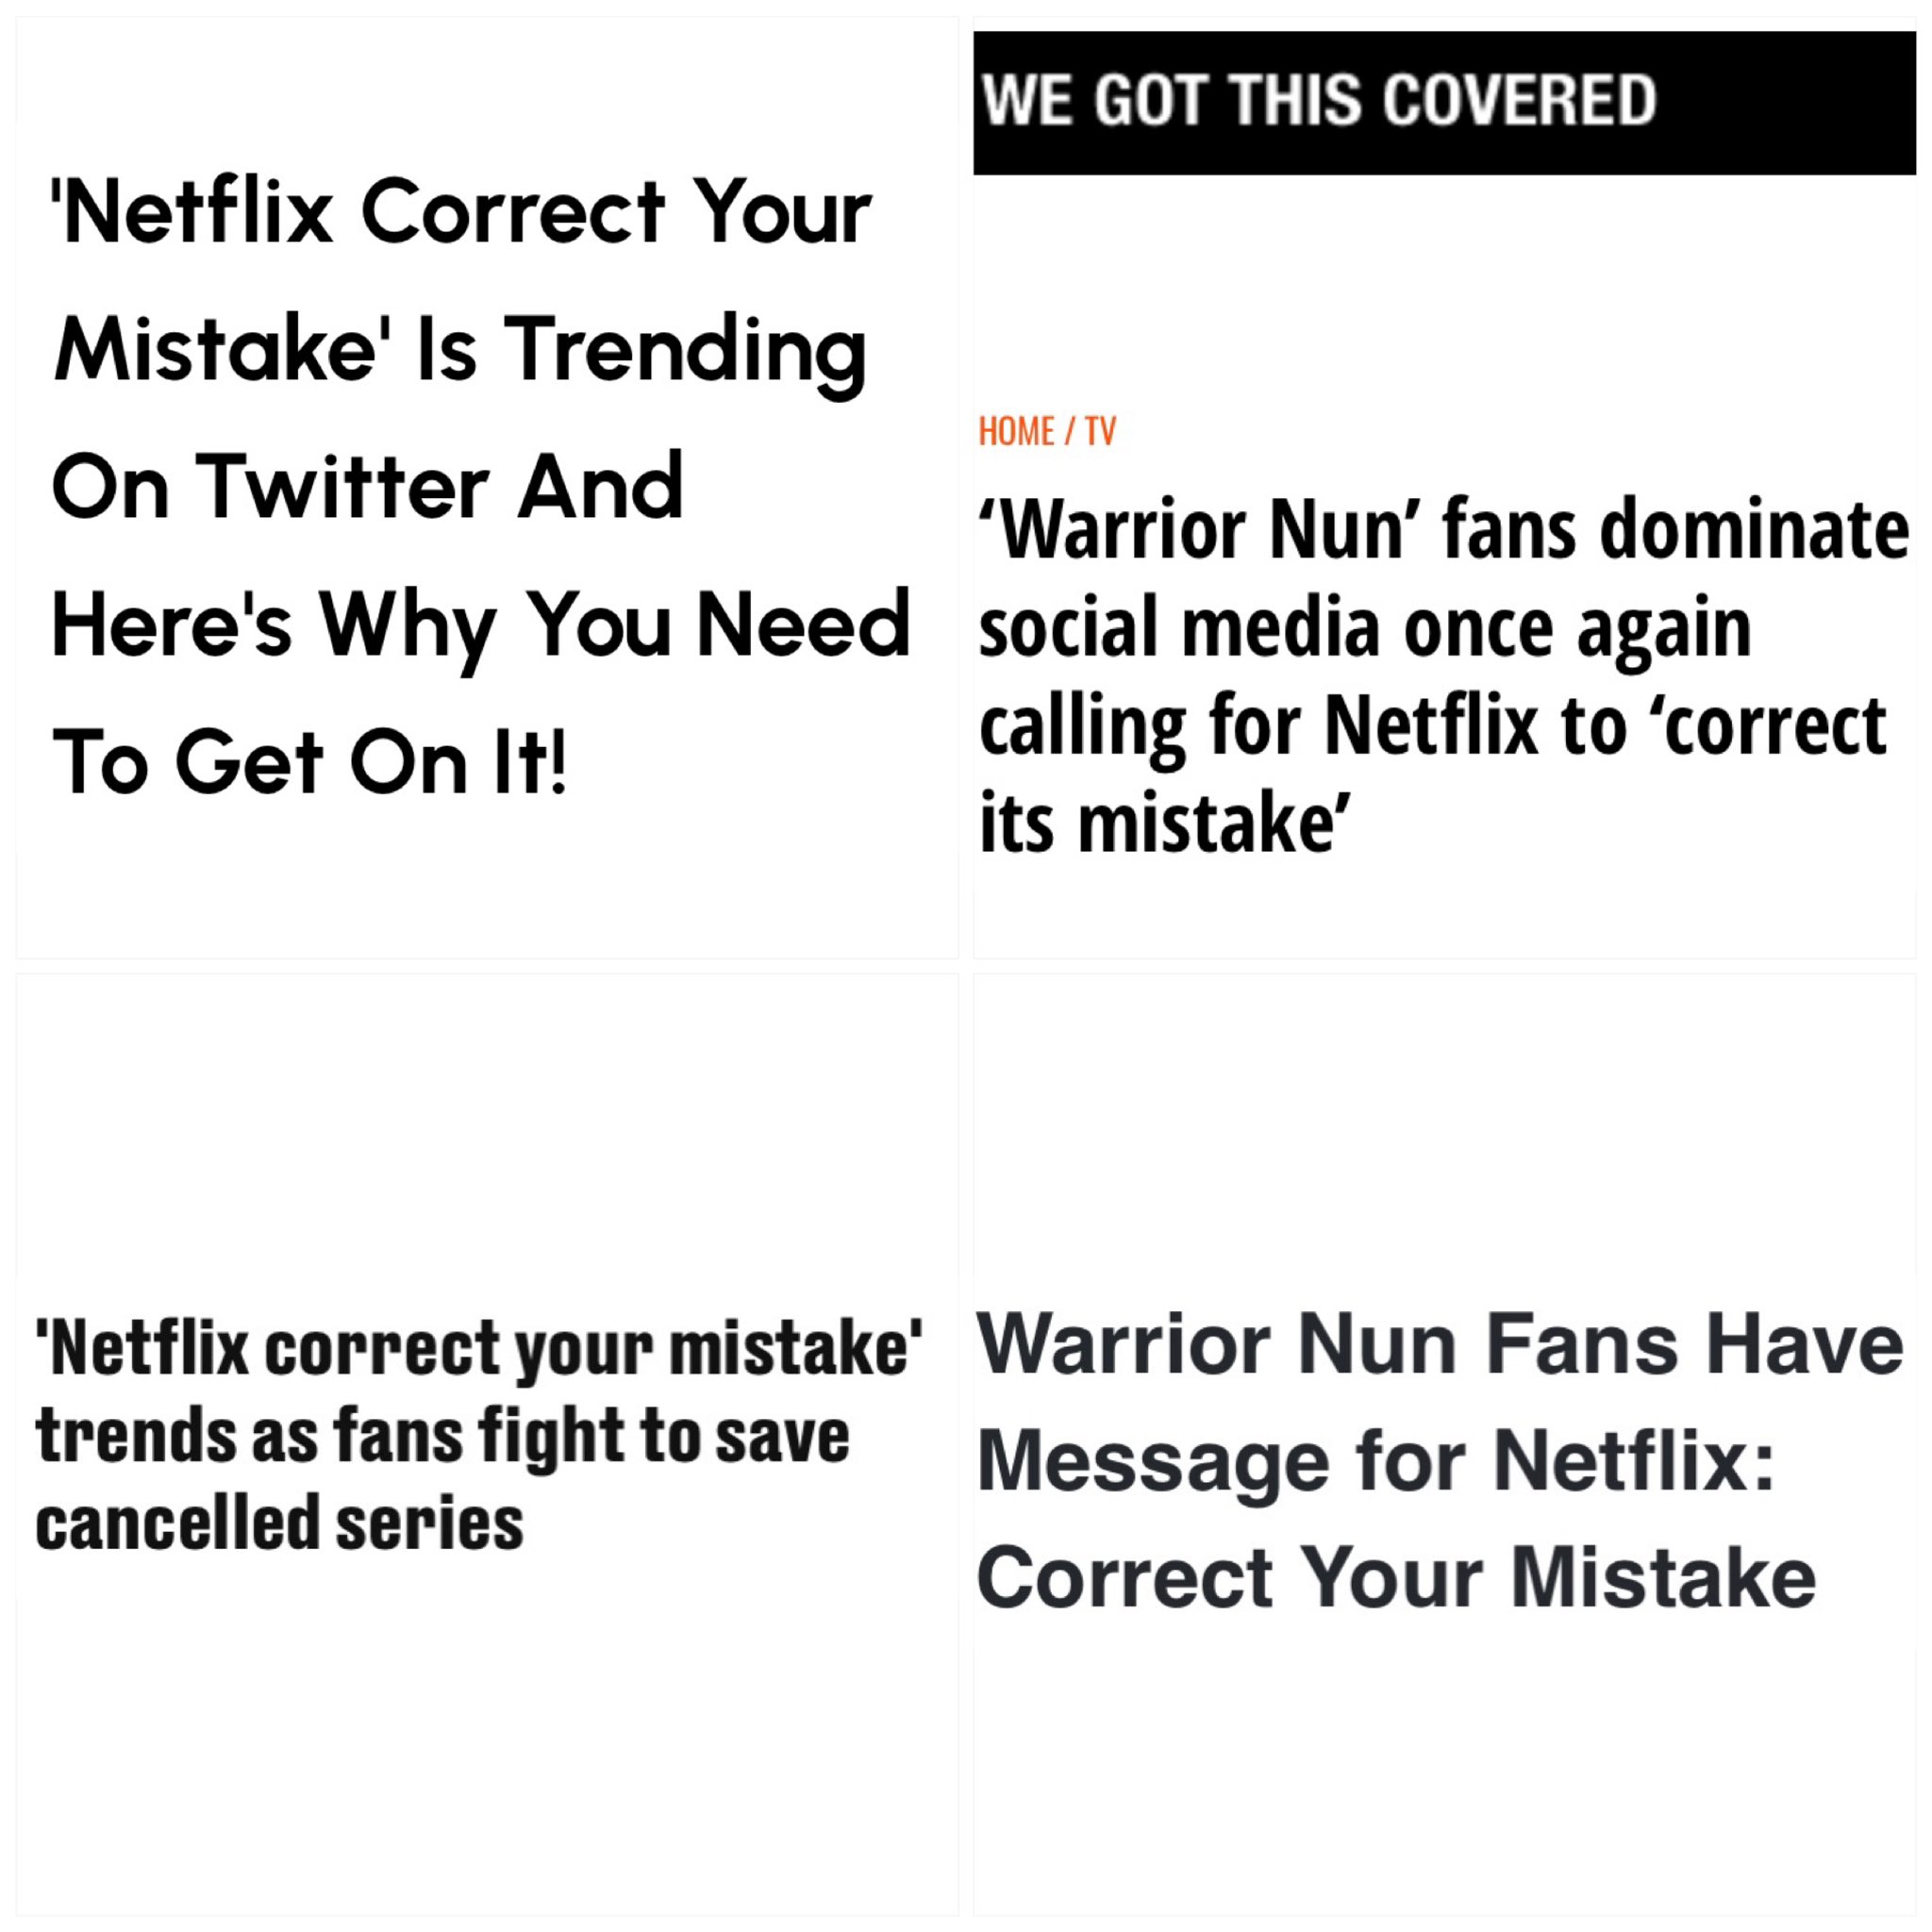 Warrior Nun' Fans Are Asking Netflix to “Correct Its Mistake” and